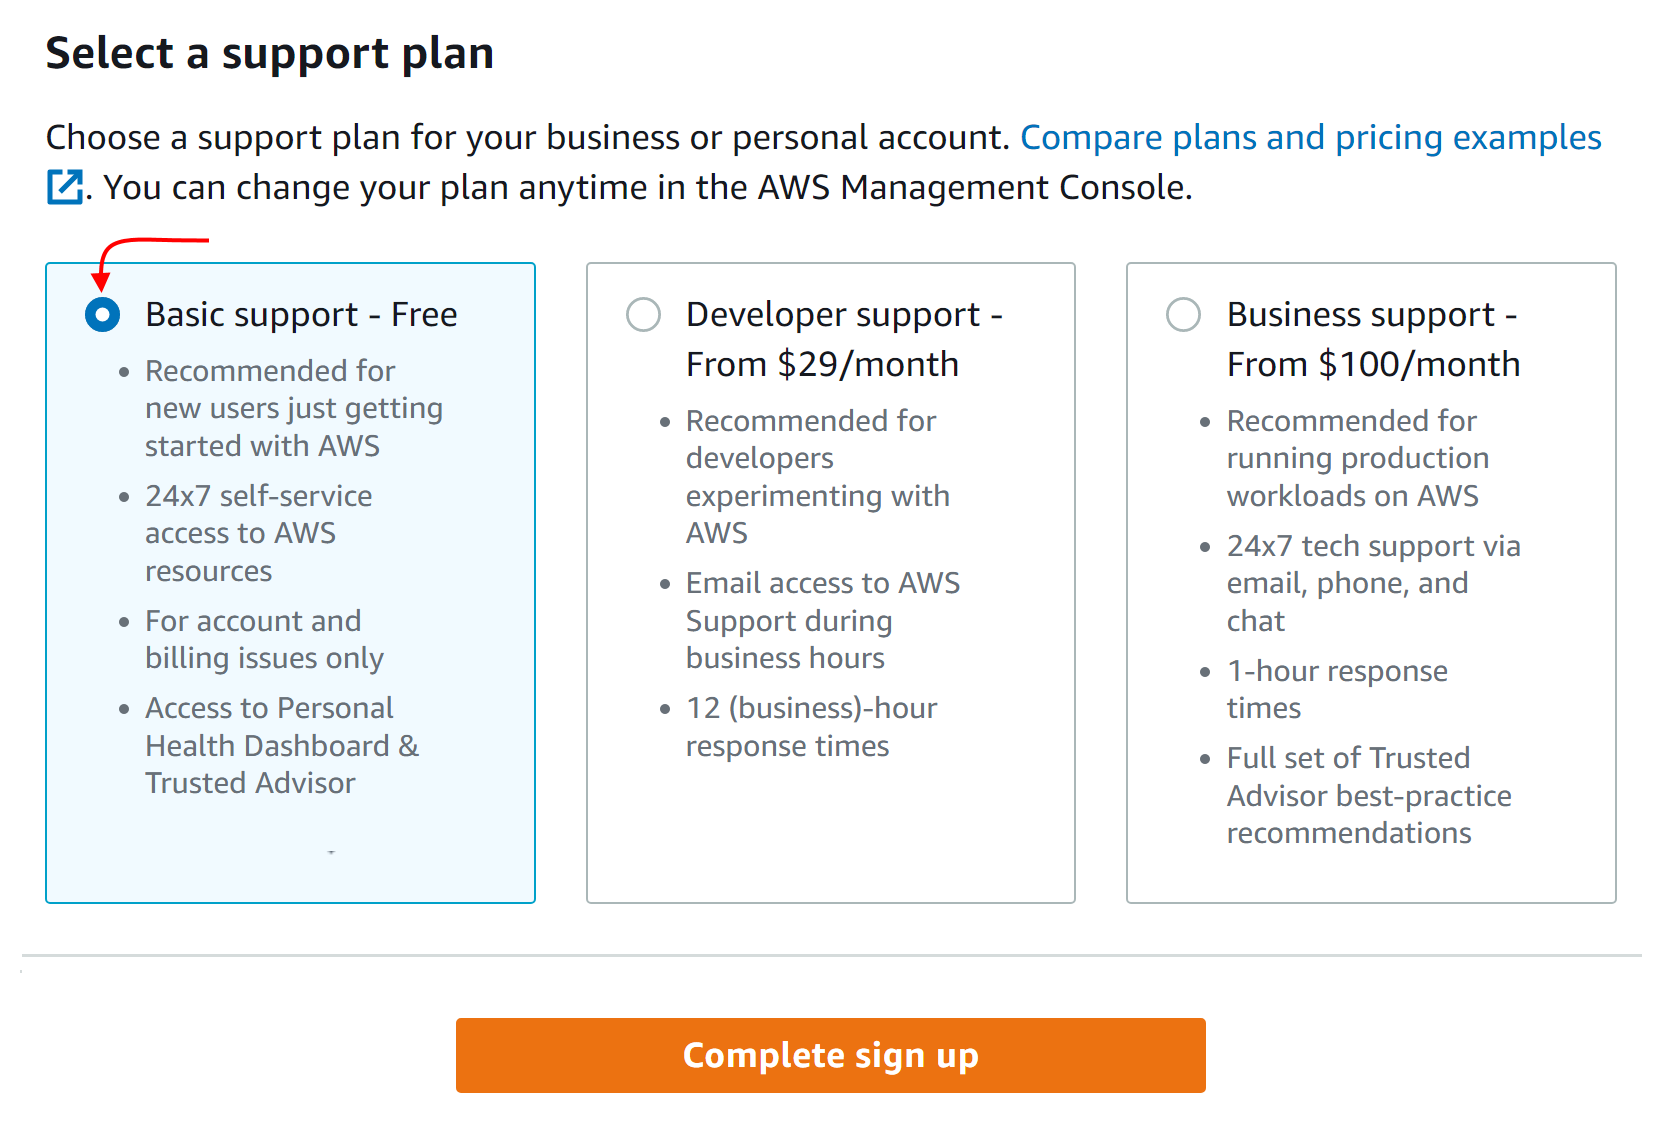 Select a support plan